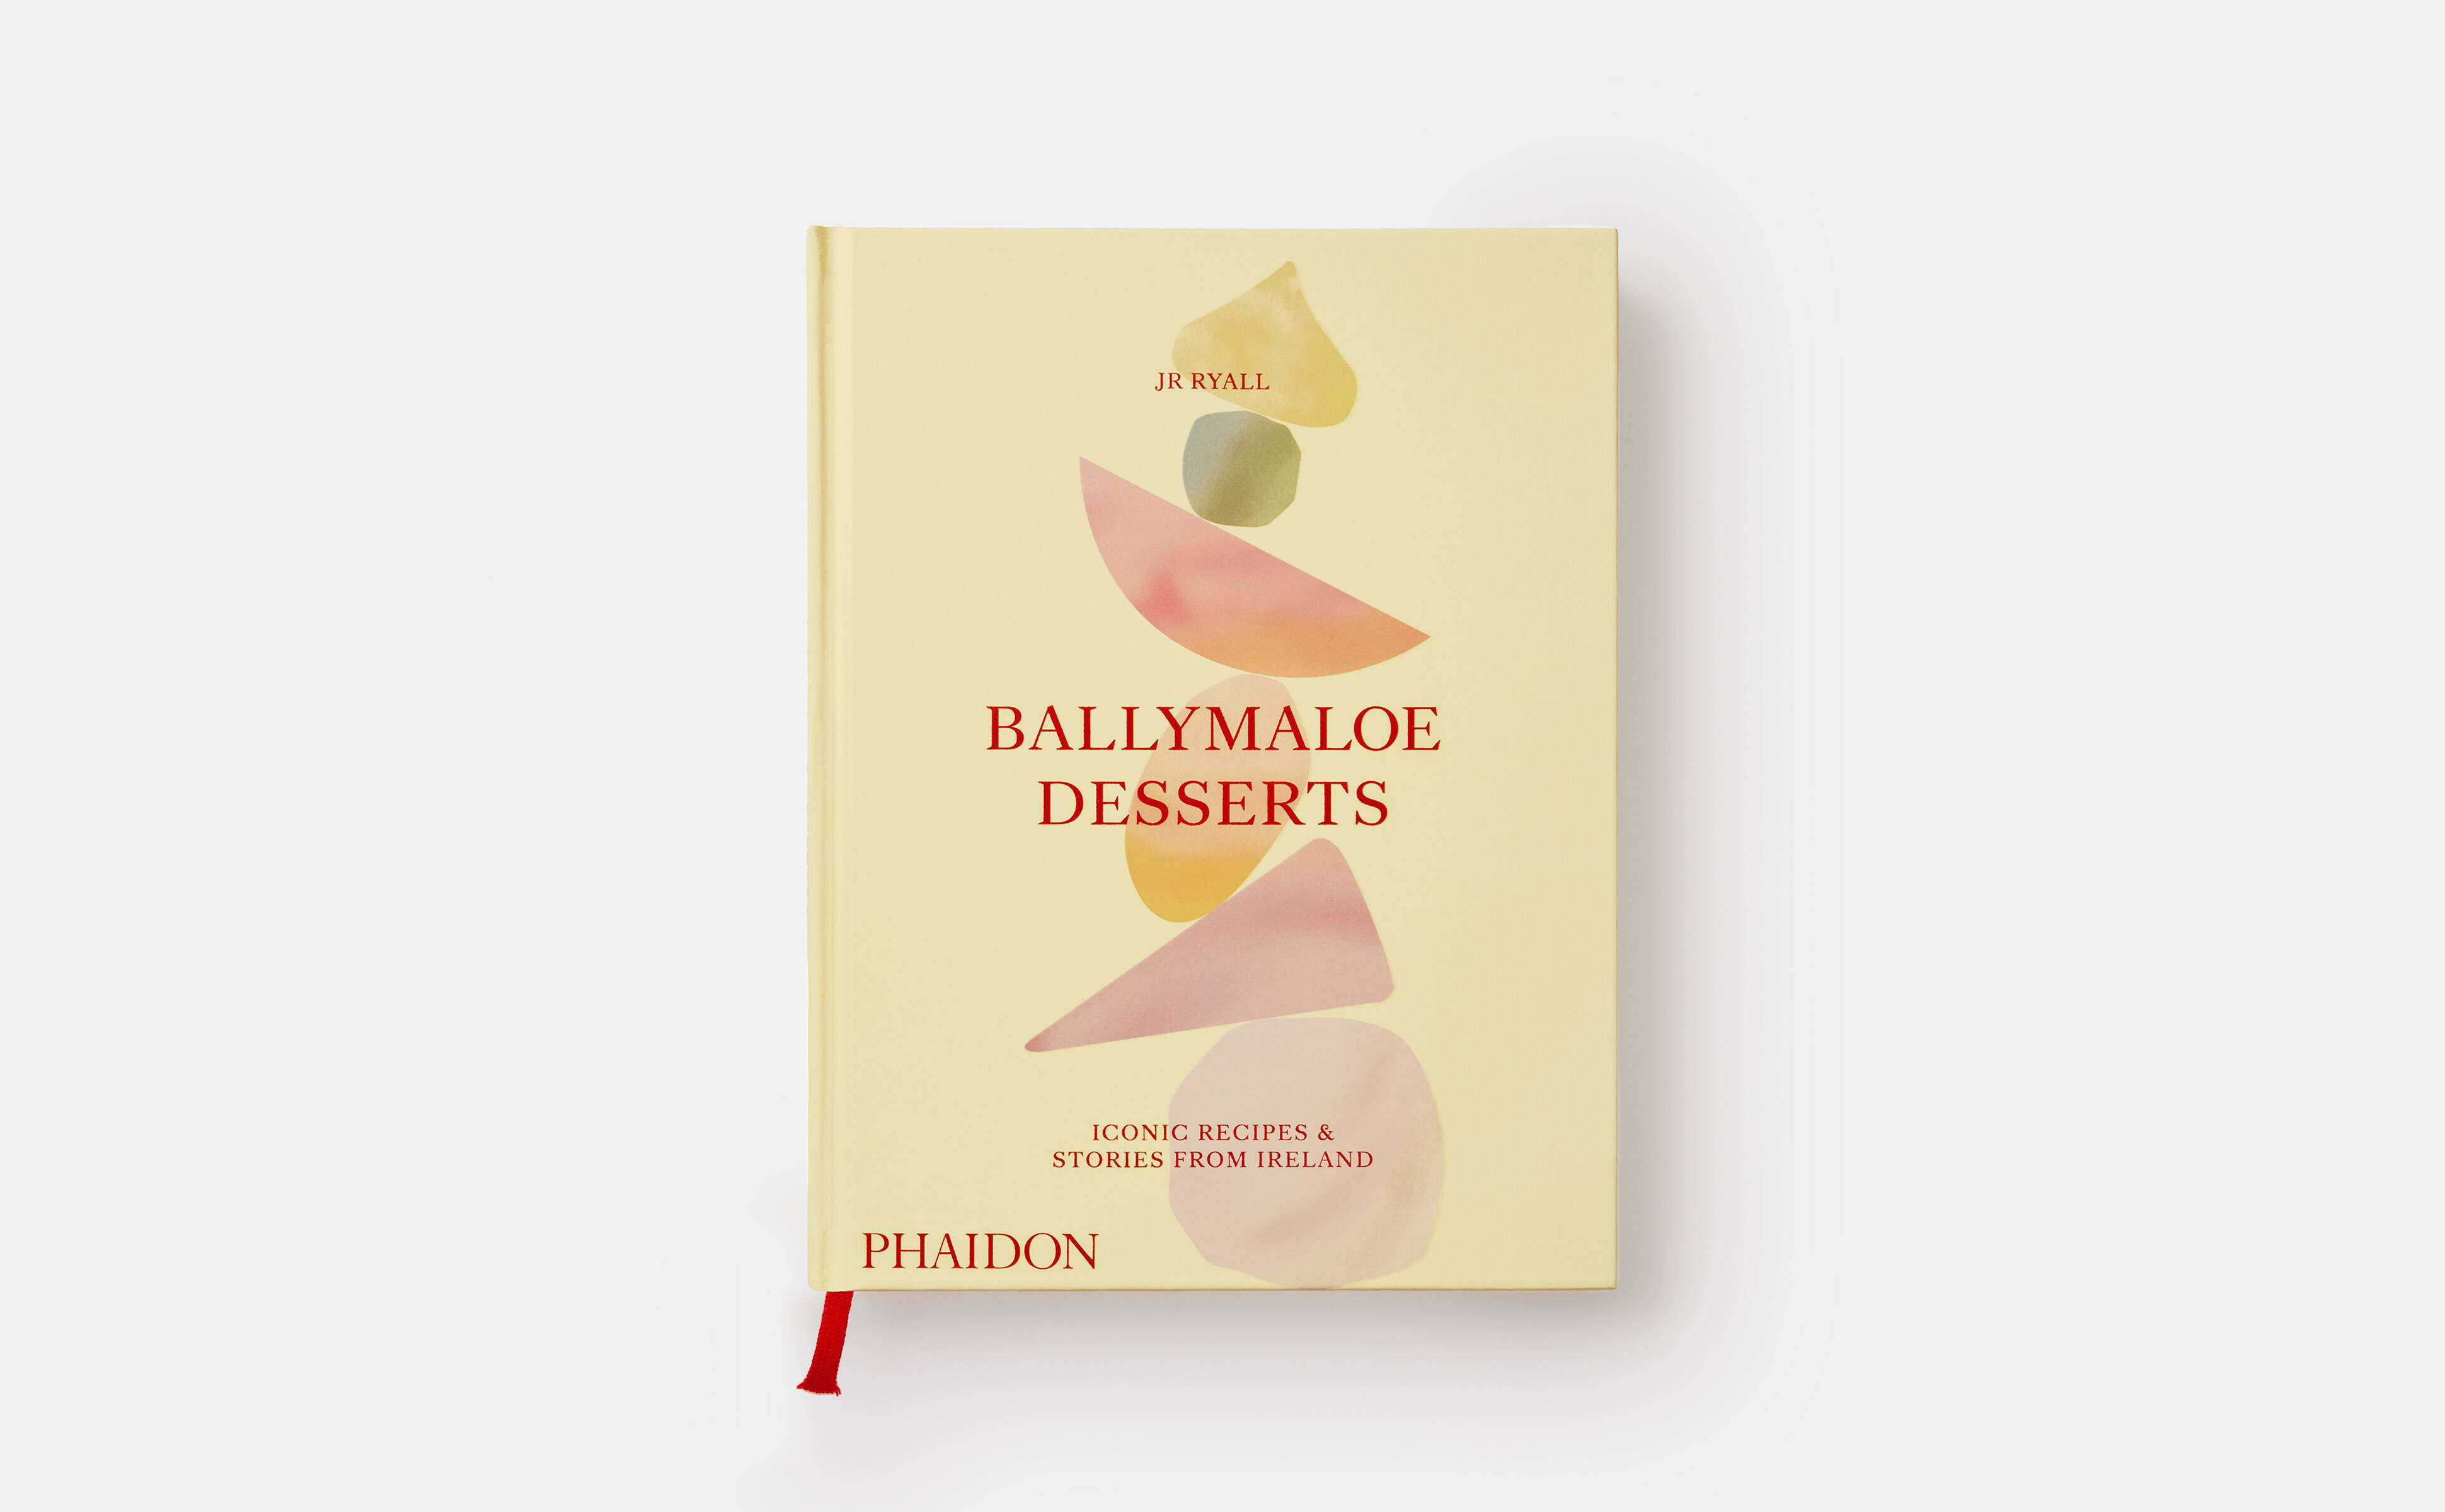 The hugely talented young chef behind Ballymaloe Desserts